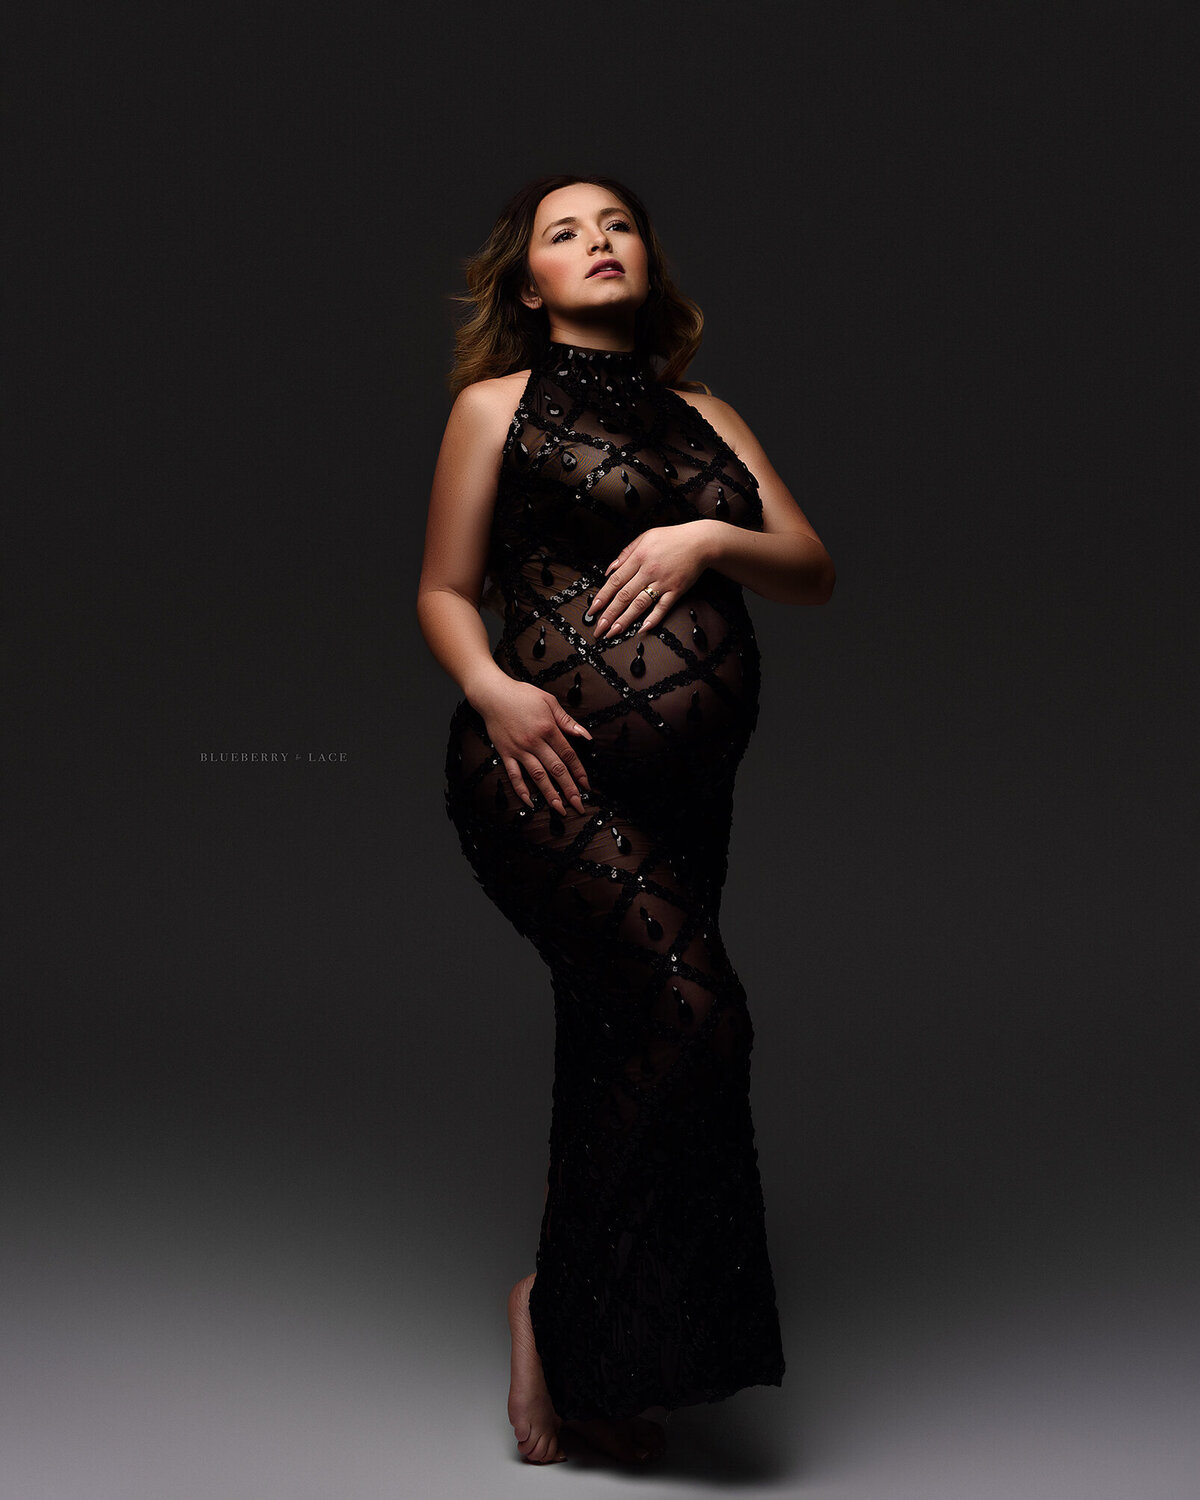 Modern Glam Gown in Syracuse New York photography studio